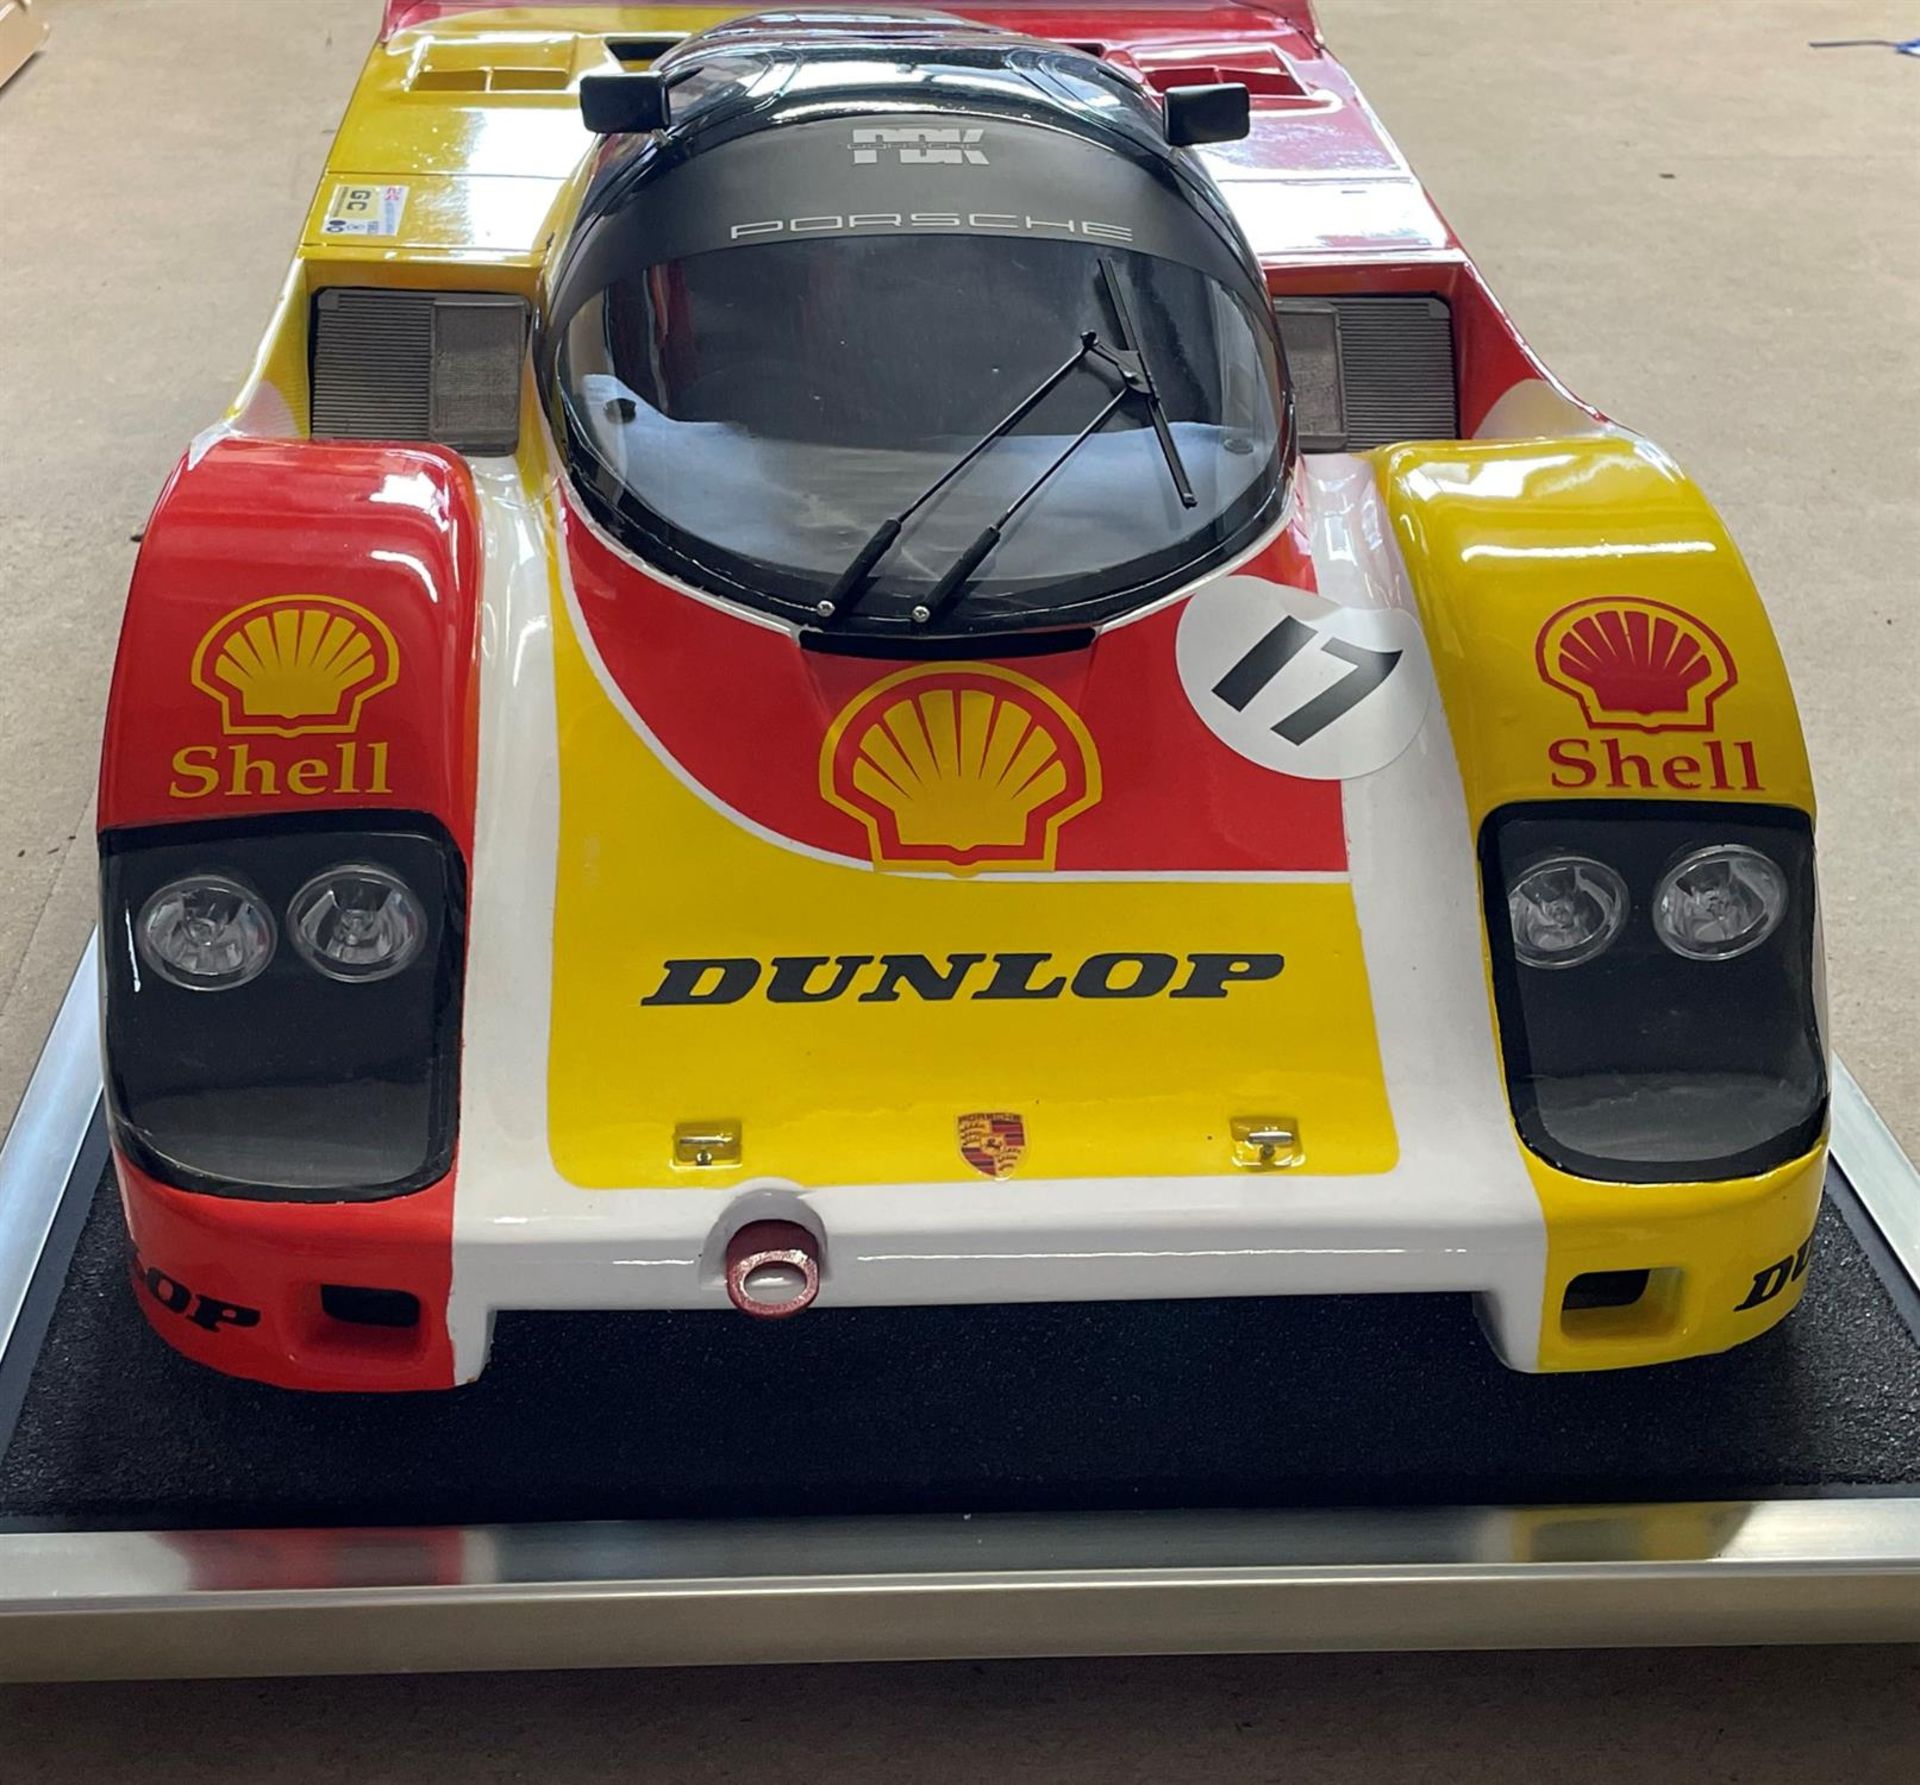 Stunning 1:5th Scale Dunlop-Shell Porsche 956 by Javan Smith - Image 4 of 10